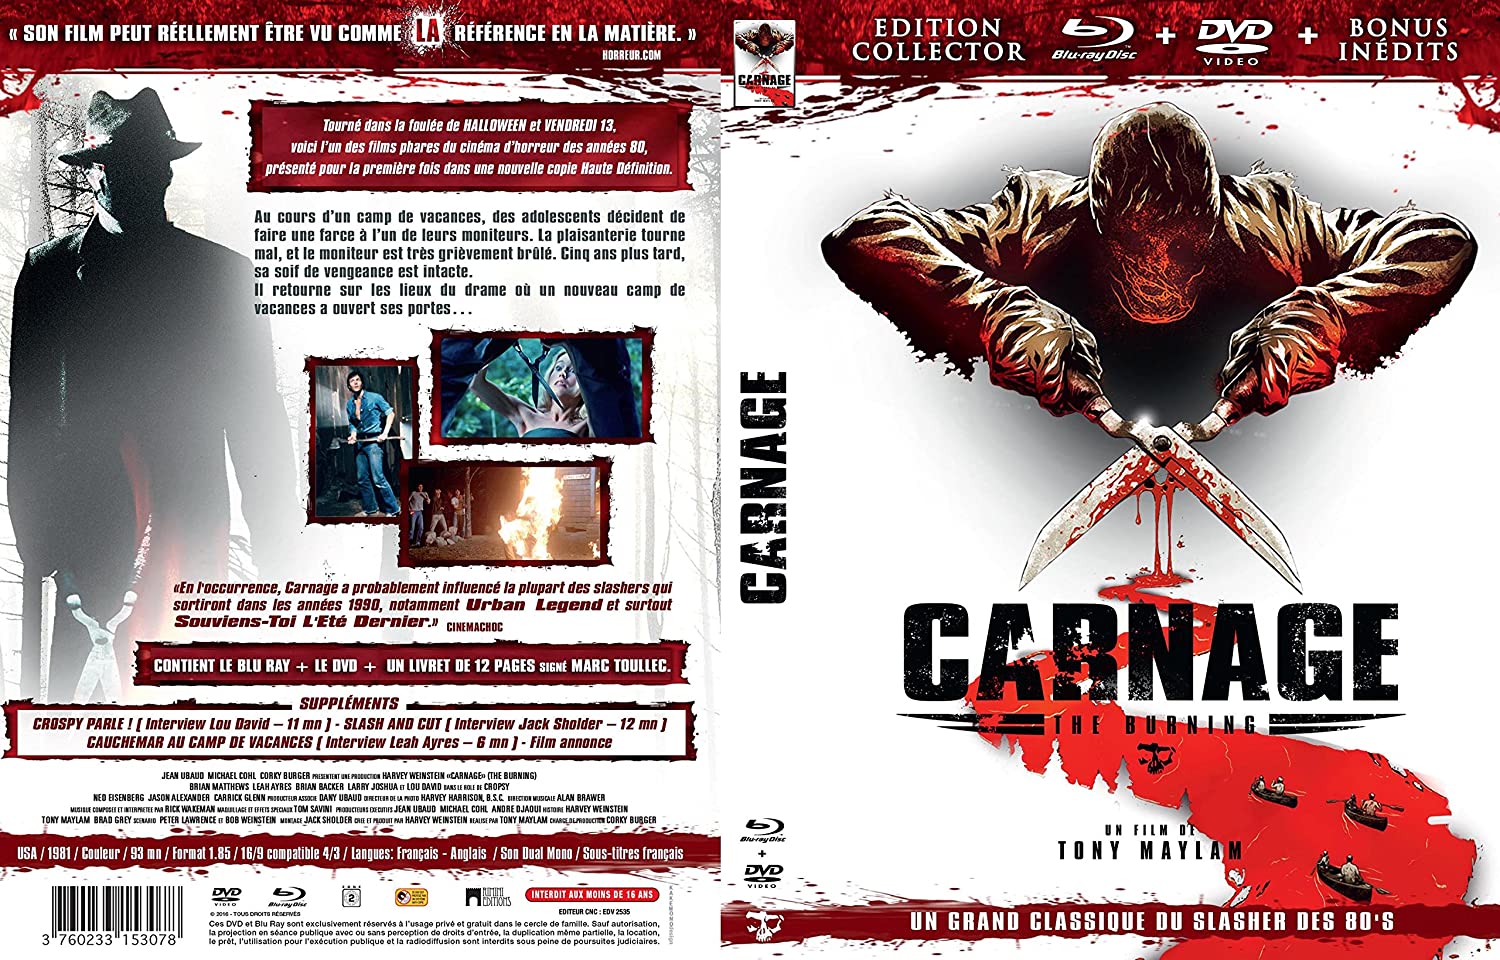 Jaquette DVD Carnage (1981) (BLU-RAY)